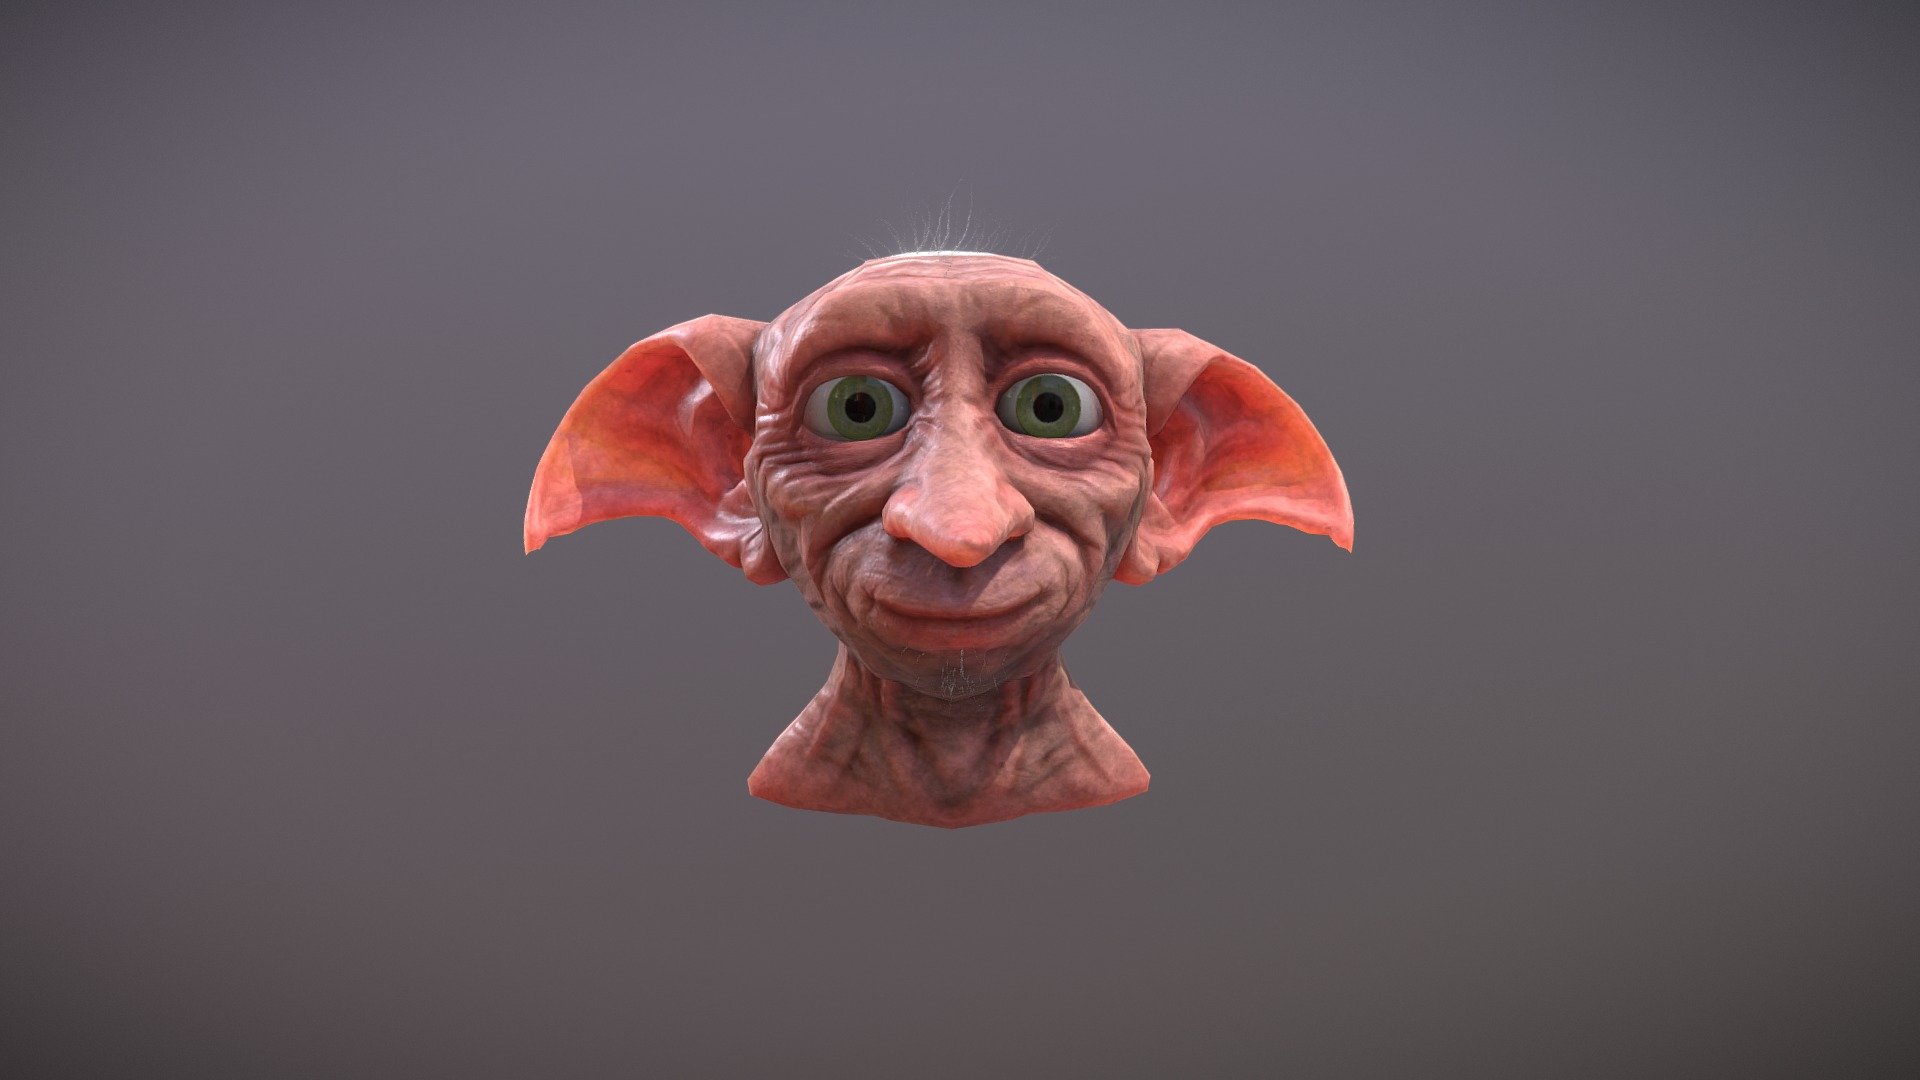 Dobby bust, sculpted and modelled in Blender and textured in Substance Painter - Dobby - 3D model by Rob Allen (@roba) 3d model